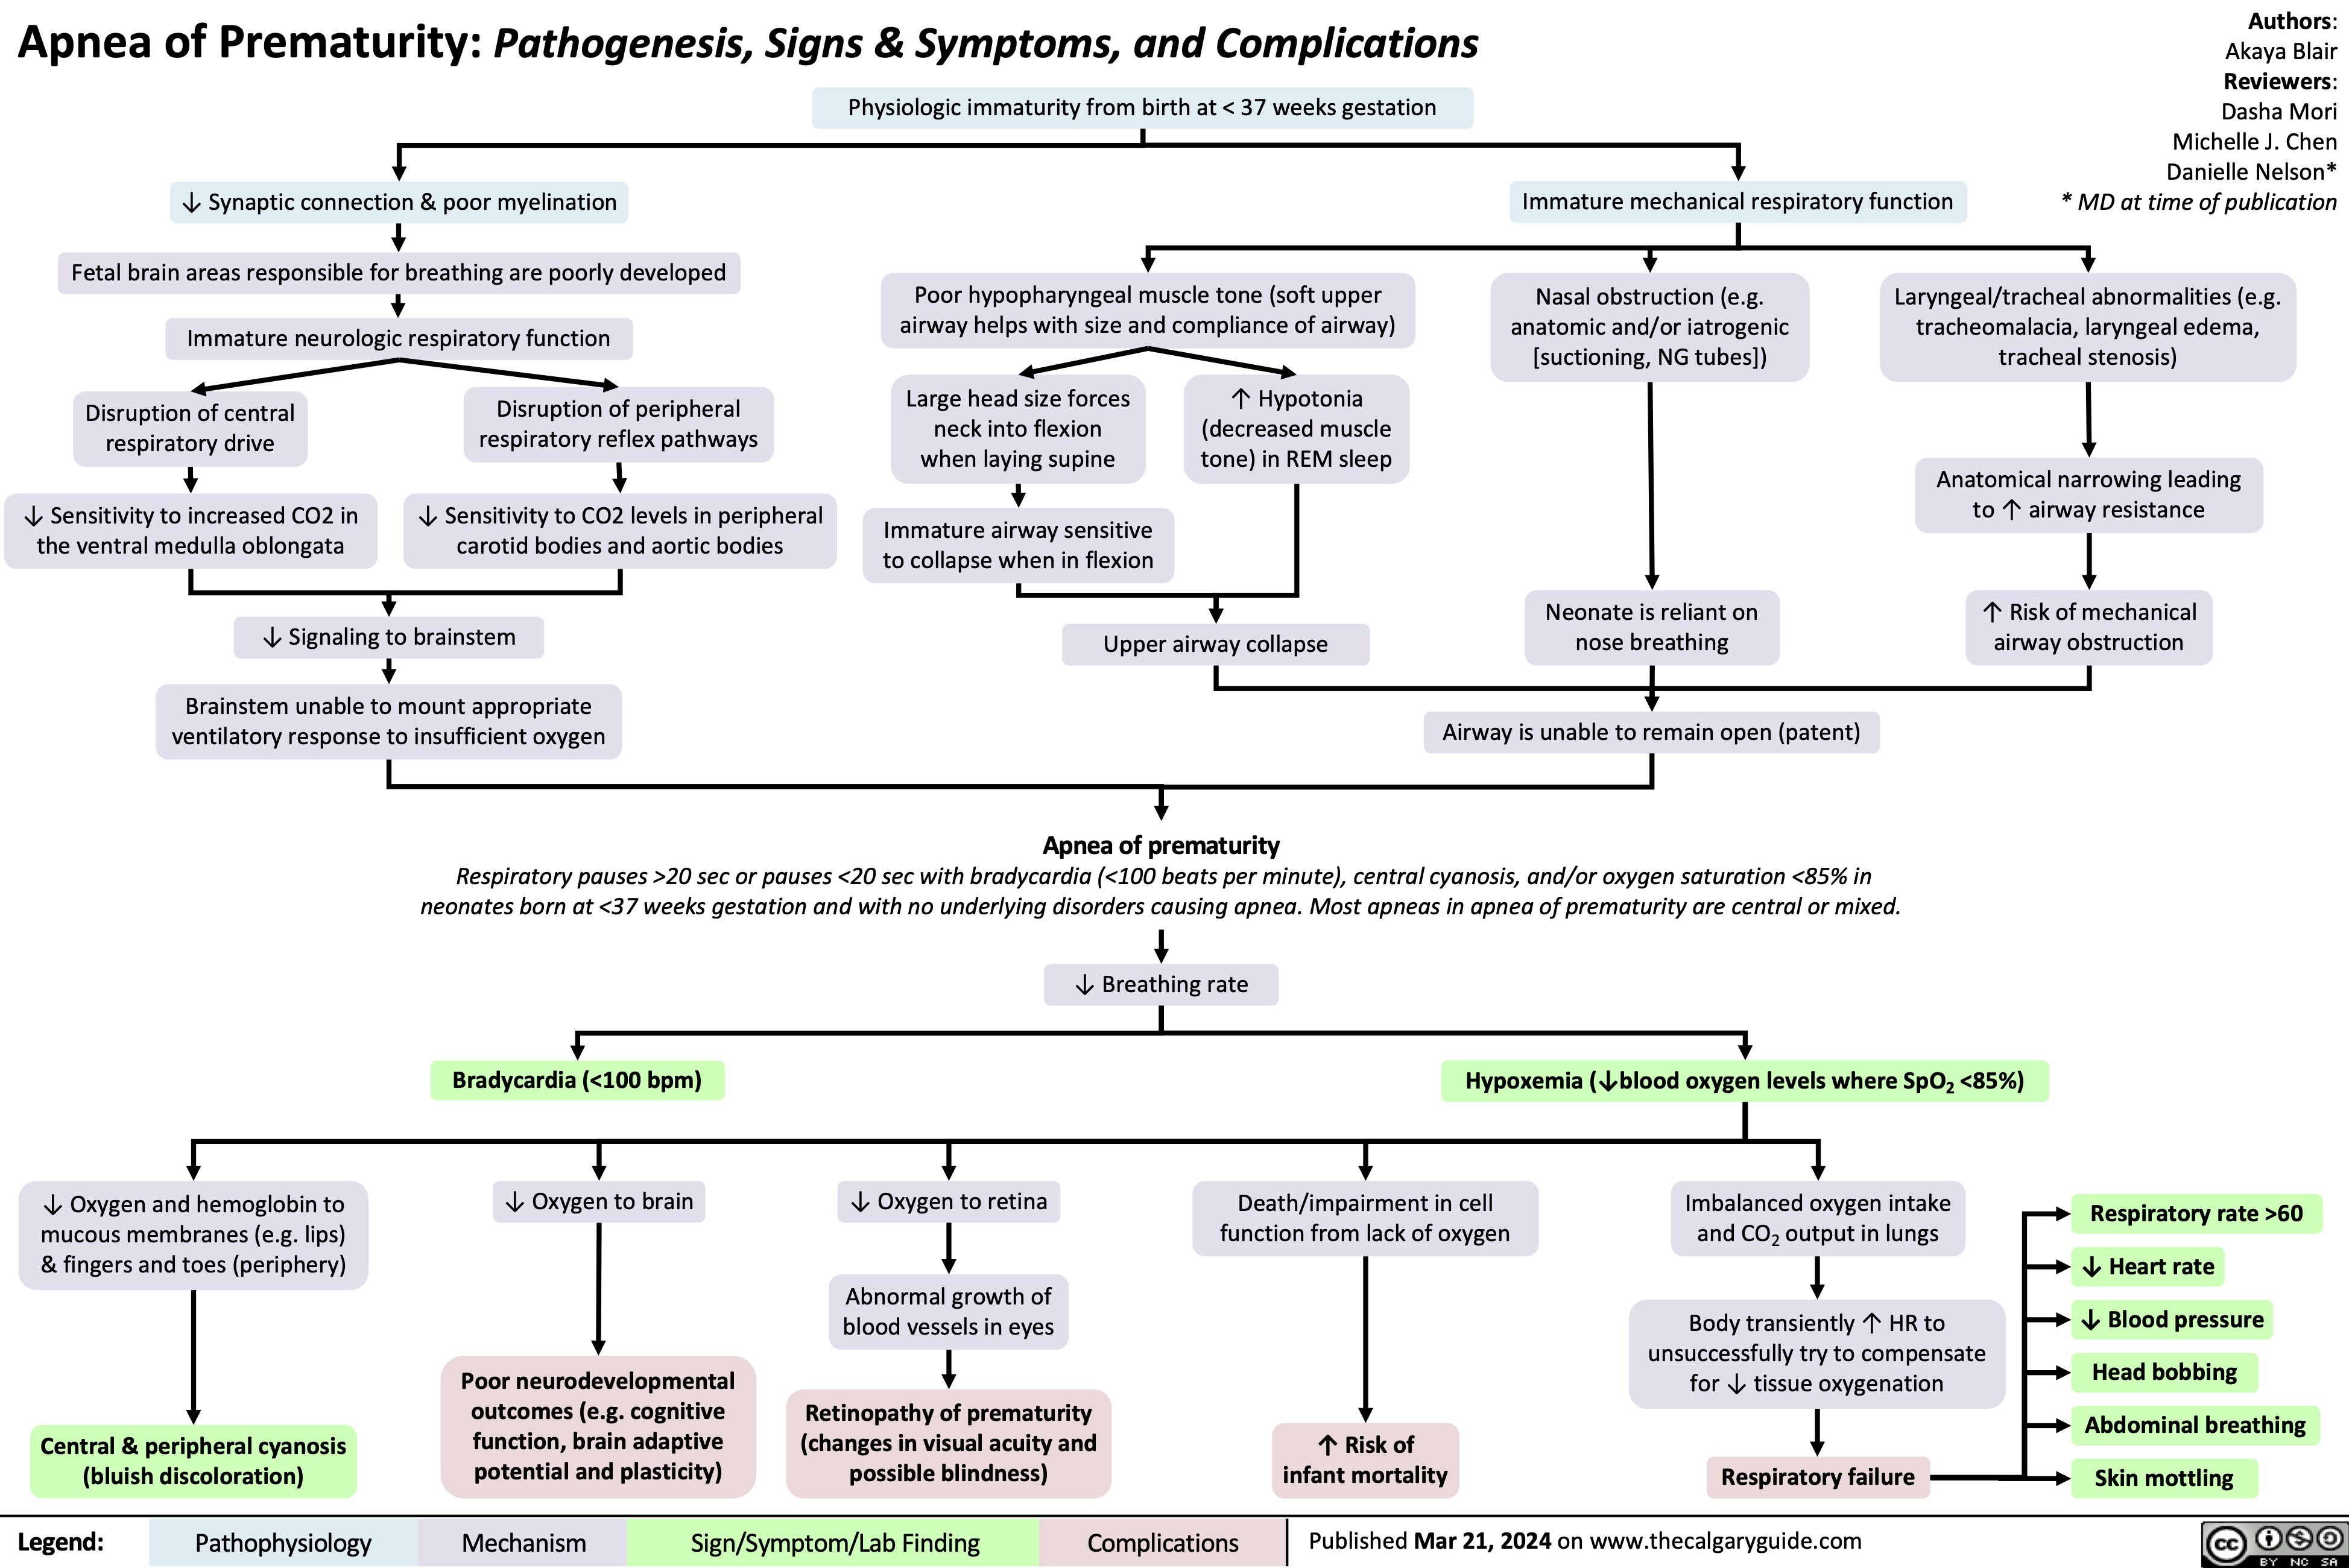 Apnea of Prematurity: Pathogenesis, Signs & Symptoms, and Complications Physiologic immaturity from birth at < 37 weeks gestation
Authors: Akaya Blair Reviewers:
Dasha Mori Michelle J. Chen Danielle Nelson* * MD at time of publication
     ↓ Synaptic connection & poor myelination
Fetal brain areas responsible for breathing are poorly developed Immature neurologic respiratory function
Immature mechanical respiratory function
      Poor hypopharyngeal muscle tone (soft upper airway helps with size and compliance of airway)
Nasal obstruction (e.g. anatomic and/or iatrogenic [suctioning, NG tubes])
Neonate is reliant on nose breathing
Airway is unable to remain open (patent)
Laryngeal/tracheal abnormalities (e.g. tracheomalacia, laryngeal edema, tracheal stenosis)
Anatomical narrowing leading to ↑ airway resistance
↑ Risk of mechanical airway obstruction
         Disruption of central respiratory drive
↓ Sensitivity to increased CO2 in the ventral medulla oblongata
Disruption of peripheral respiratory reflex pathways
↓ Sensitivity to CO2 levels in peripheral carotid bodies and aortic bodies
Large head size forces neck into flexion when laying supine
Immature airway sensitive to collapse when in flexion
↑ Hypotonia (decreased muscle tone) in REM sleep
         ↓ Signaling to brainstem
Brainstem unable to mount appropriate ventilatory response to insufficient oxygen
Upper airway collapse
Apnea of prematurity
       Respiratory pauses >20 sec or pauses <20 sec with bradycardia (<100 beats per minute), central cyanosis, and/or oxygen saturation <85% in neonates born at <37 weeks gestation and with no underlying disorders causing apnea. Most apneas in apnea of prematurity are central or mixed.
↓ Breathing rate
     Bradycardia (<100 bpm)
↓ Oxygen to brain
Poor neurodevelopmental outcomes (e.g. cognitive function, brain adaptive potential and plasticity)
Hypoxemia (↓blood oxygen levels where SpO2 <85%)
         ↓ Oxygen and hemoglobin to mucous membranes (e.g. lips) & fingers and toes (periphery)
Central & peripheral cyanosis (bluish discoloration)
↓ Oxygen to retina
Abnormal growth of blood vessels in eyes
Retinopathy of prematurity (changes in visual acuity and possible blindness)
Death/impairment in cell function from lack of oxygen
↑ Risk of infant mortality
Imbalanced oxygen intake and CO2 output in lungs
Body transiently ↑ HR to unsuccessfully try to compensate for ↓ tissue oxygenation
Respiratory failure
Respiratory rate >60 ↓ Heart rate
↓ Blood pressure
Head bobbing Abdominal breathing
                 Skin mottling
 Legend:
 Pathophysiology
 Mechanism
Sign/Symptom/Lab Finding
 Complications
 Published Mar 21, 2024 on www.thecalgaryguide.com
  